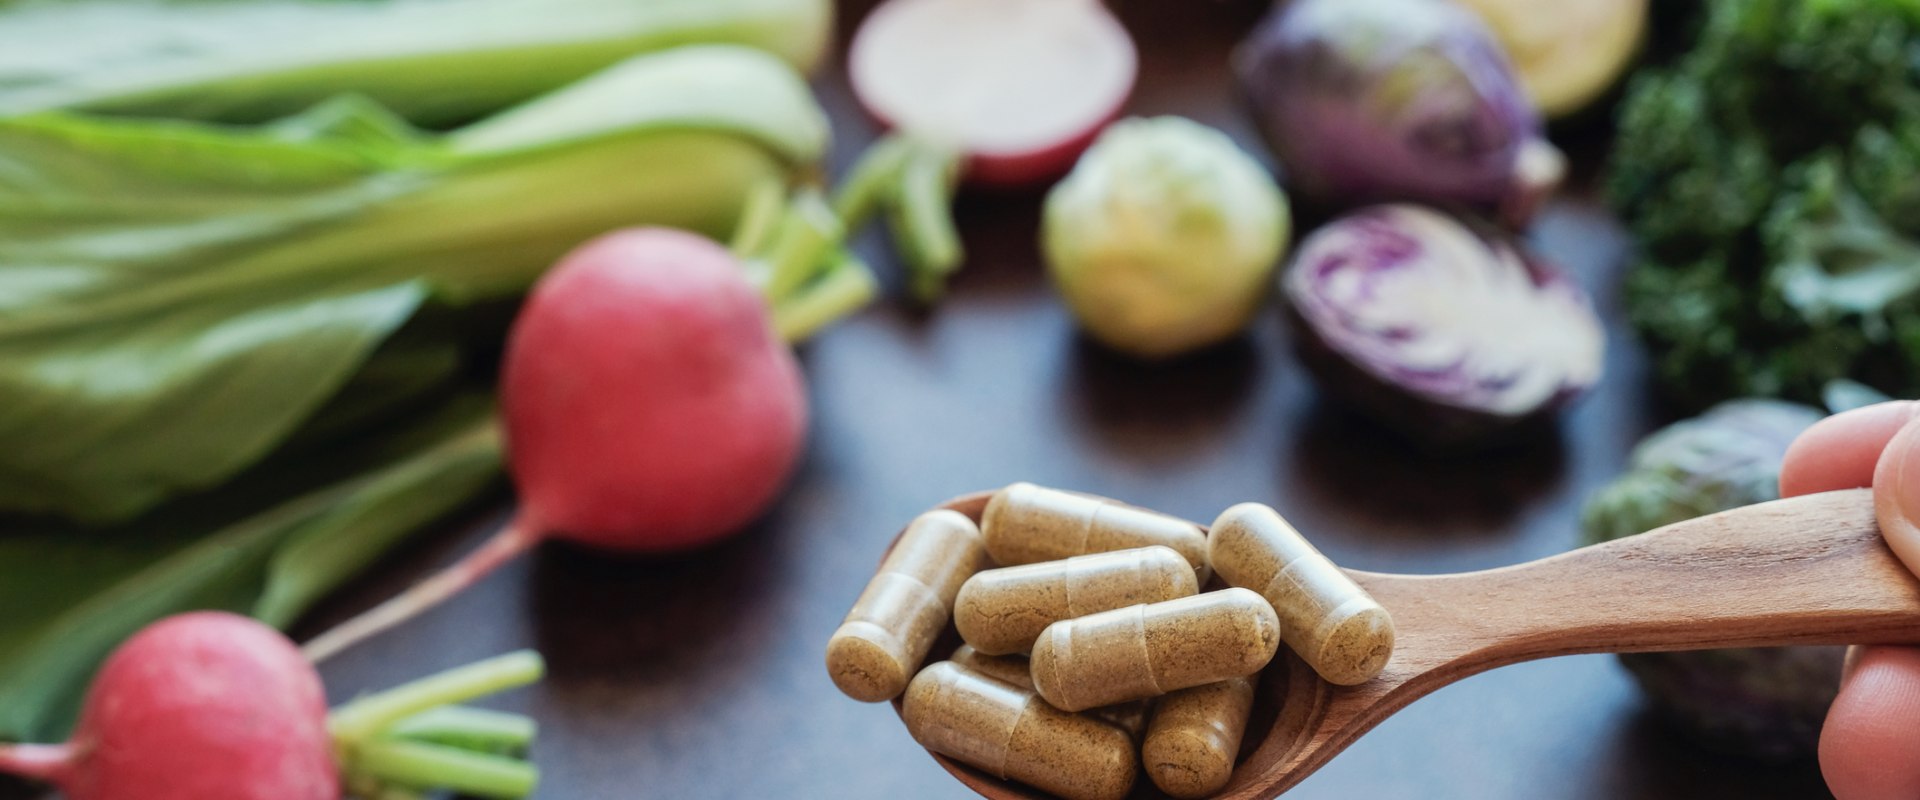 Can you take supplements for a long time?